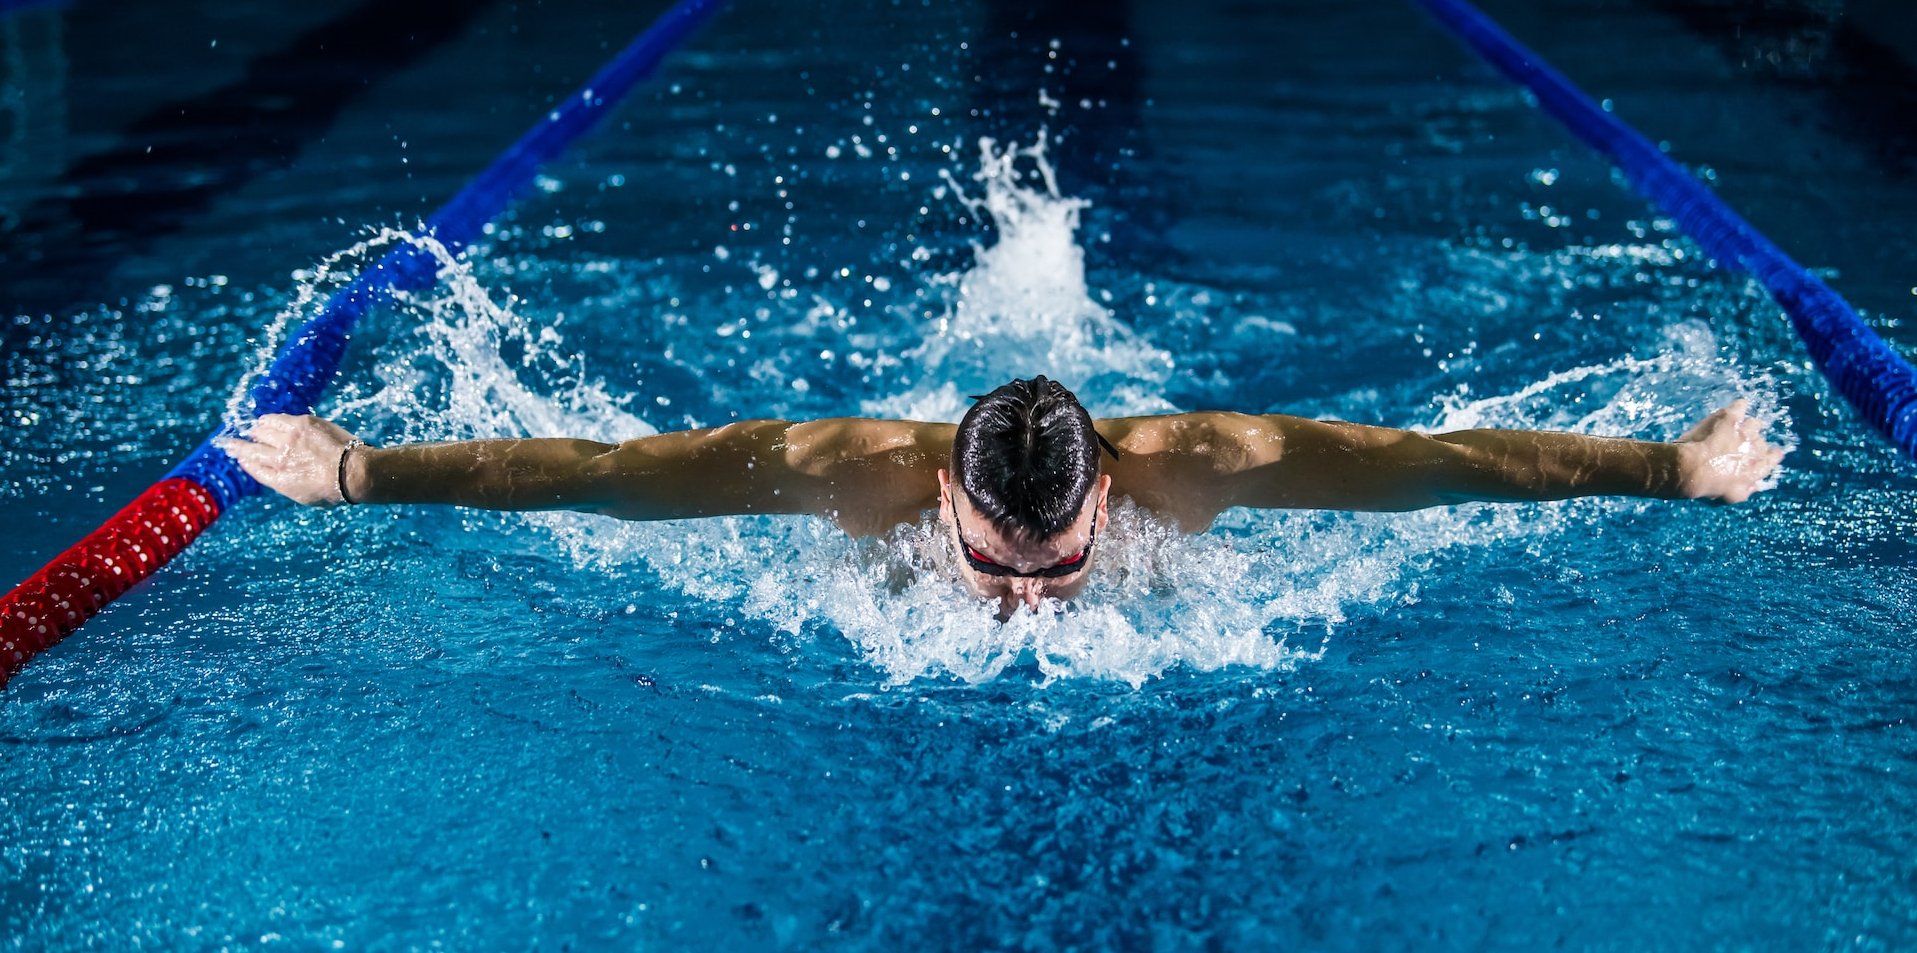 What You Need to Know About Using Earplugs for Swimming - aZengear